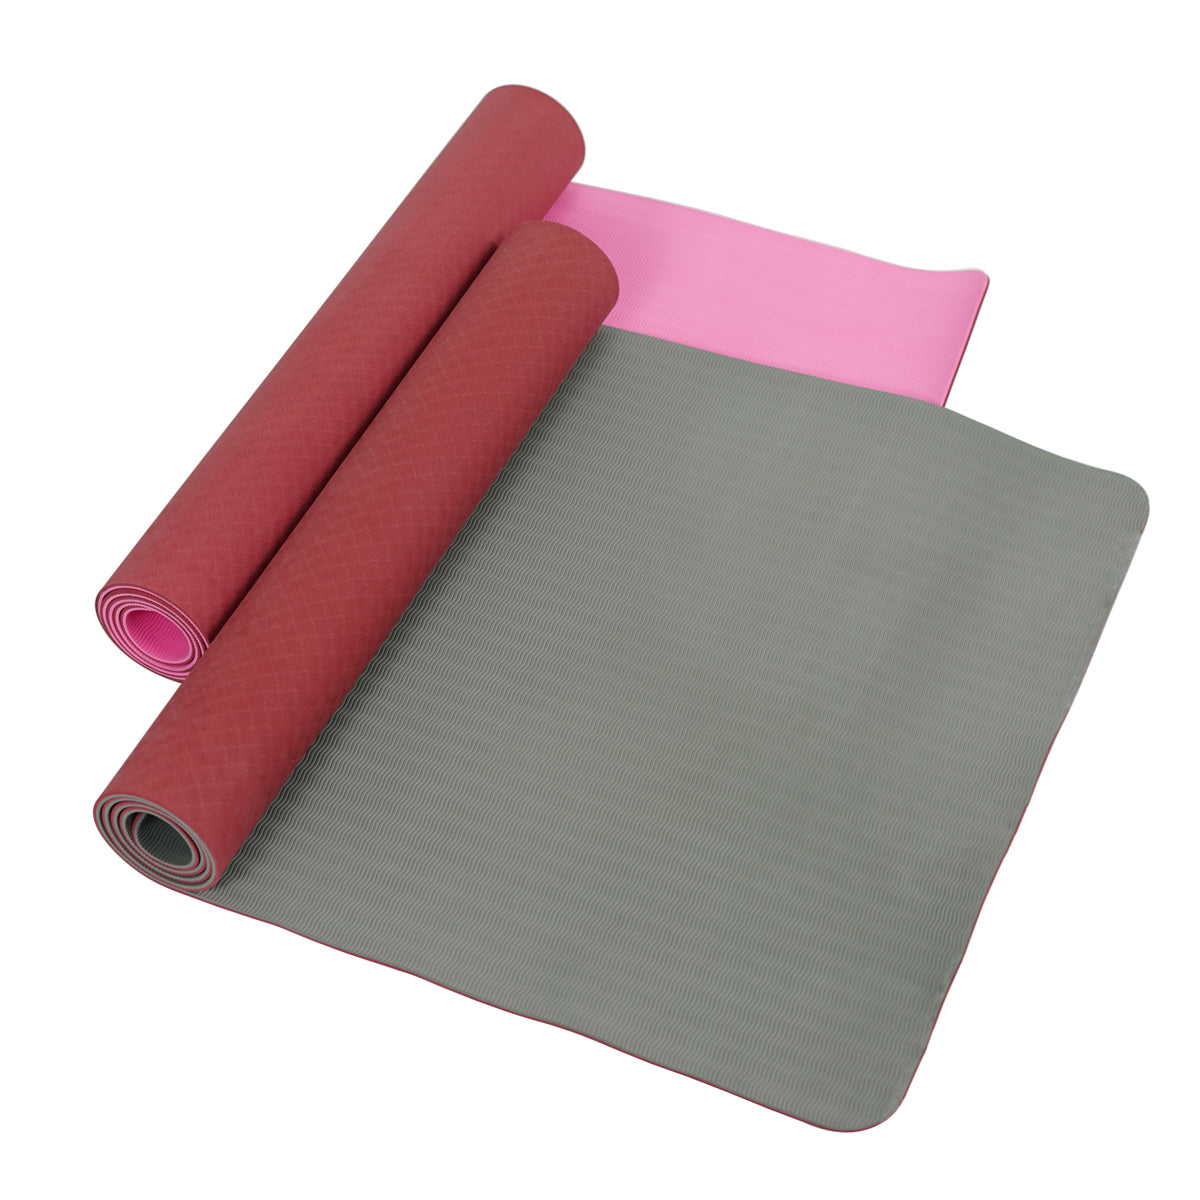 Pink Extra Wide Yoga Mat 30